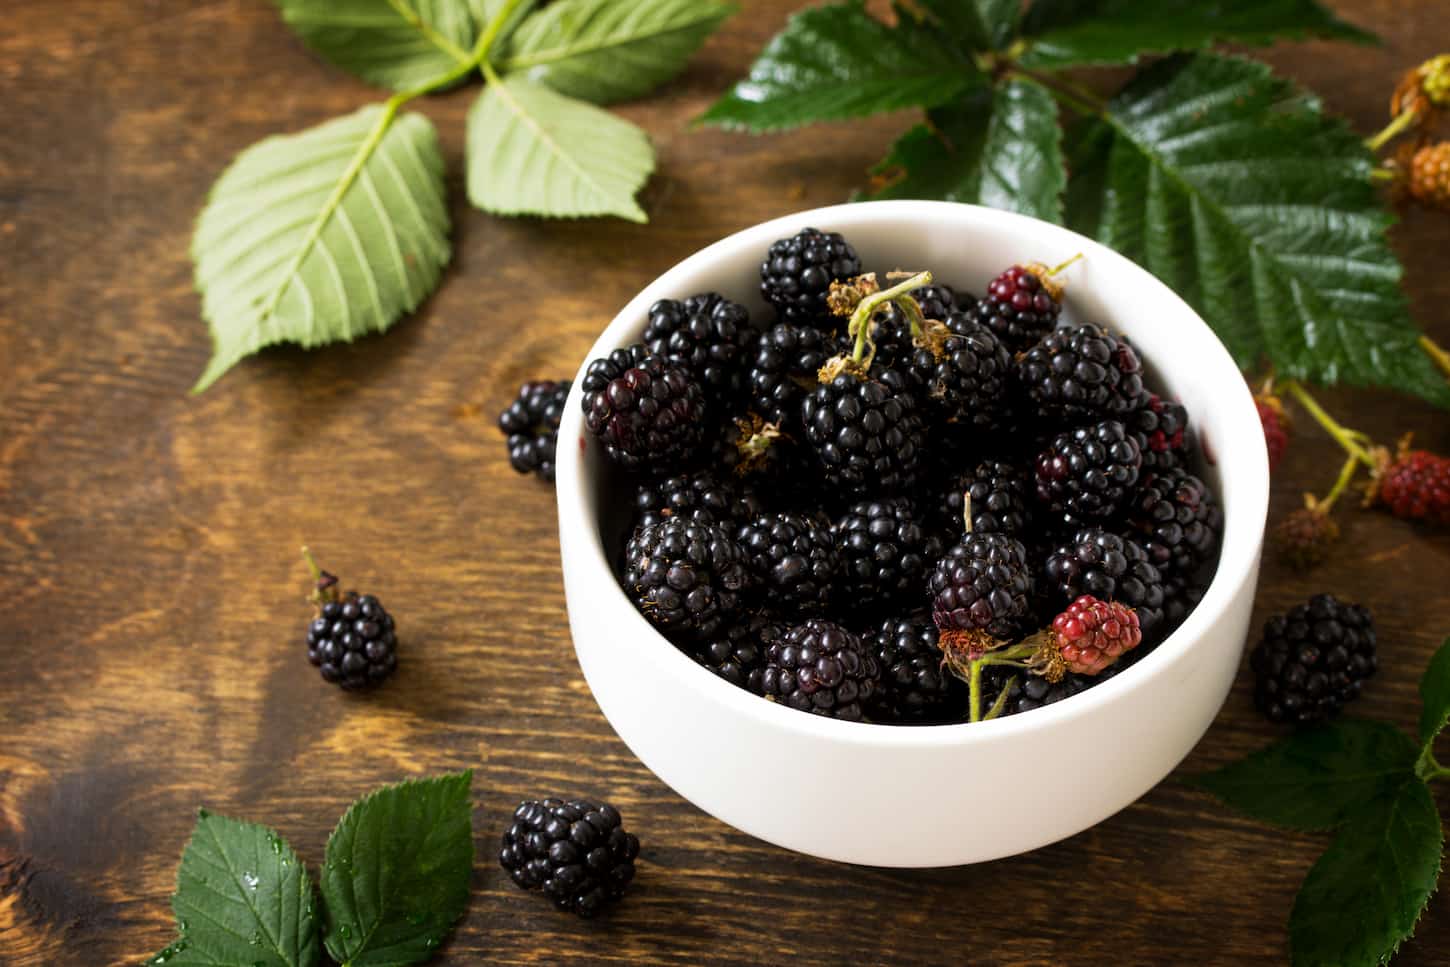 An image of Berries ripe blackberries on a kitchen wooden table.